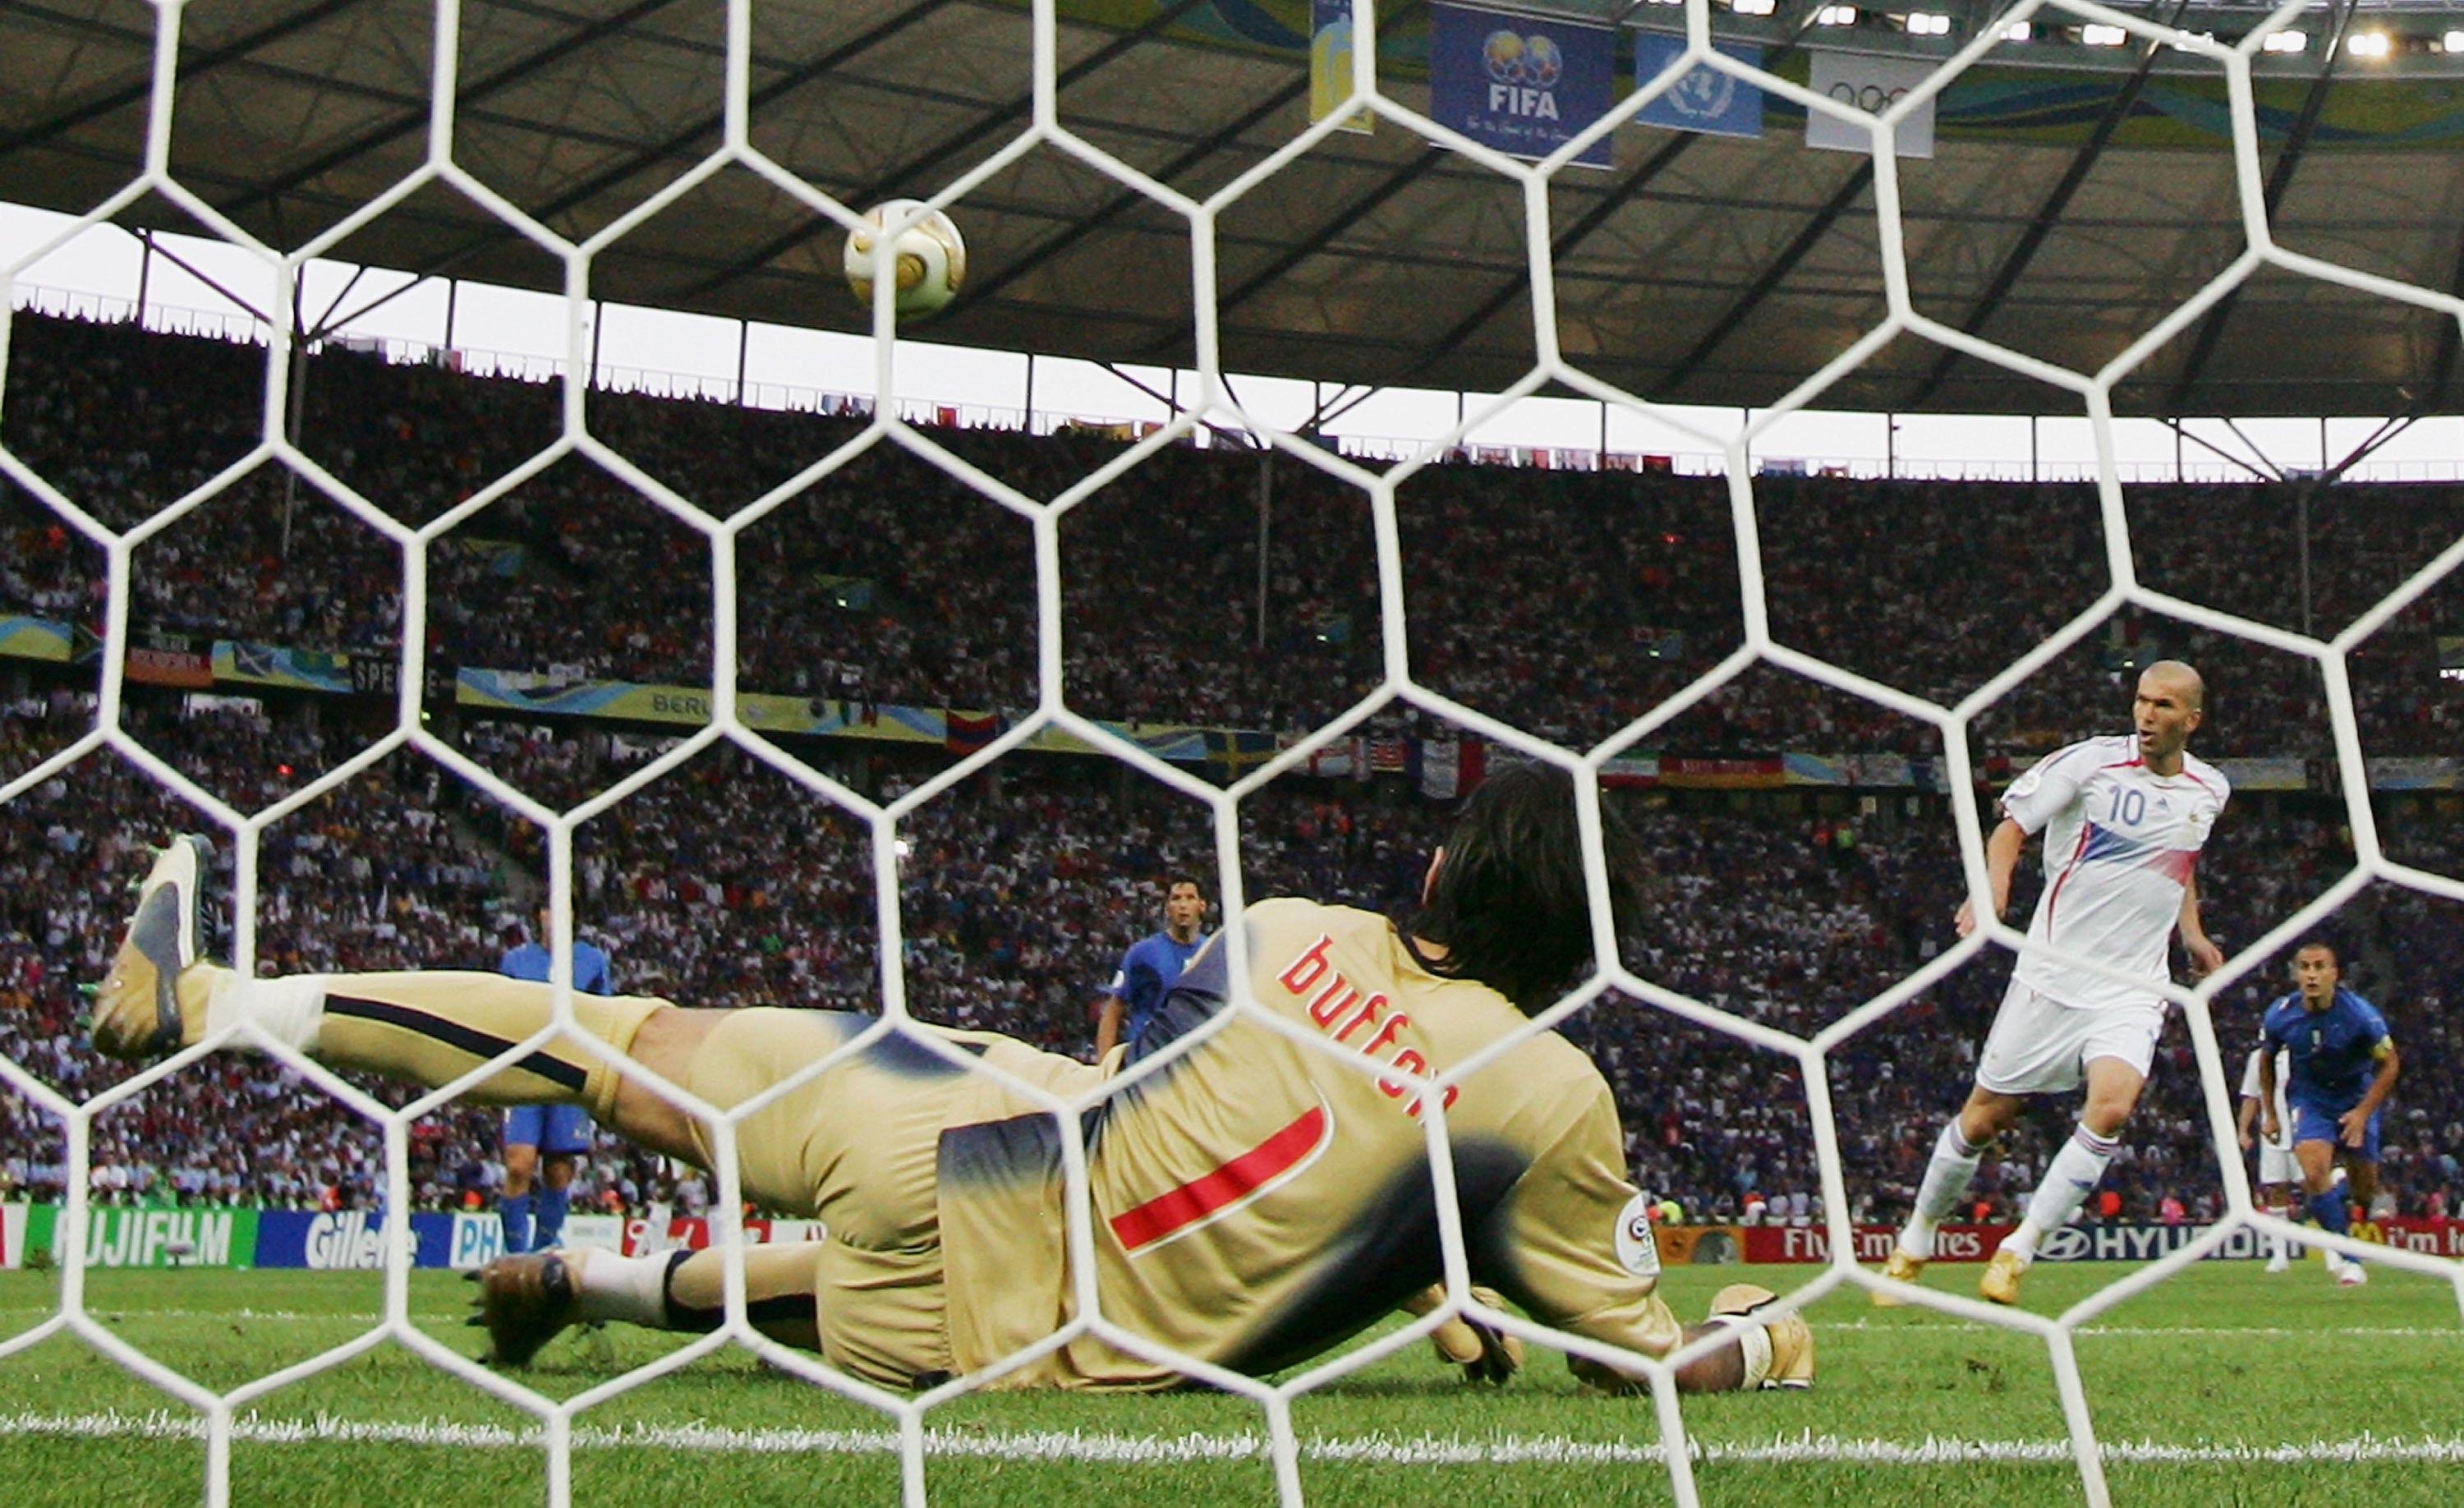 BERLIN - JULY 9:  Zinedine Zidane of France scores the opening goal  from the penalty spot past Goalkeeper Gianluigi Buffon of Italy during the FIFA World Cup Germany 2006 Final match between Italy and France at the Olympic Stadium on July 9, 2006 in Berl